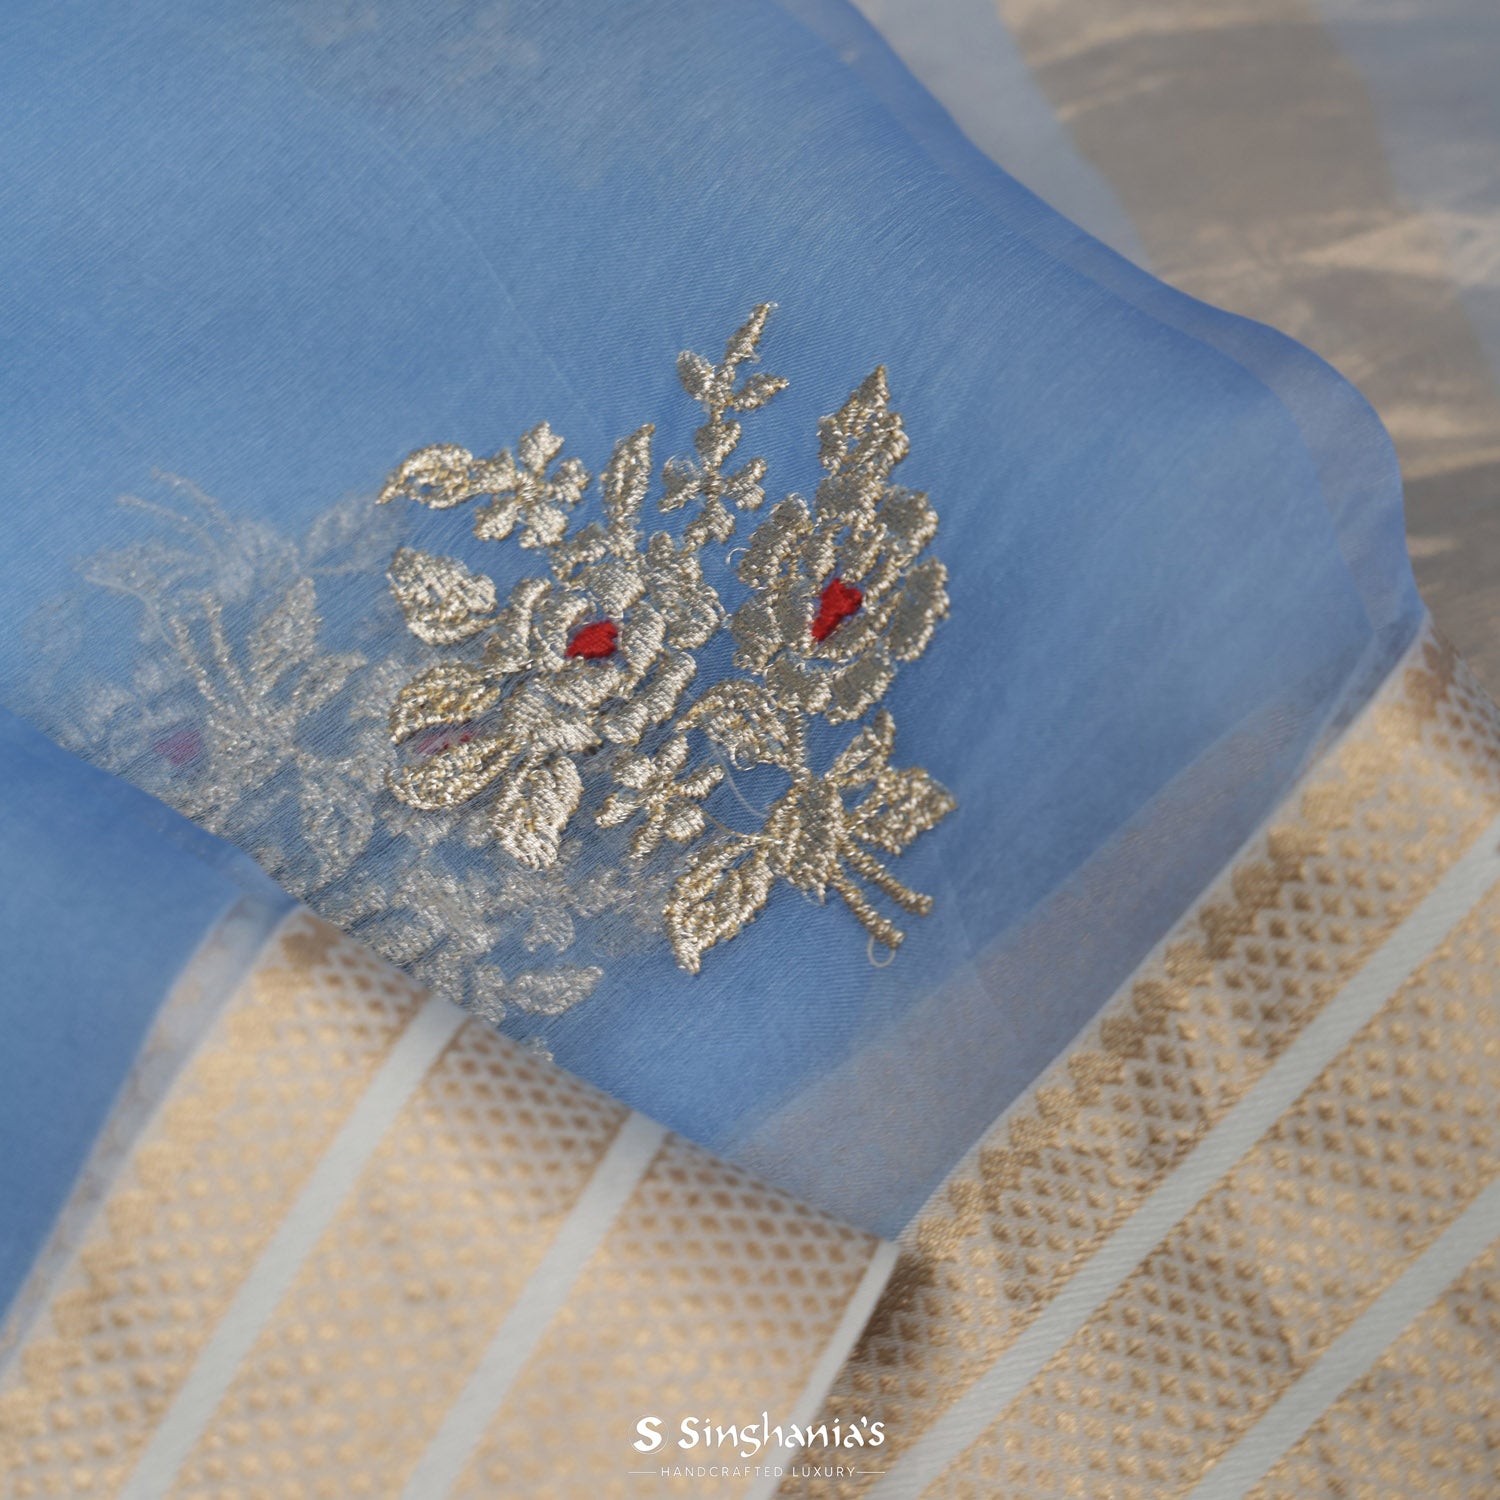 Ruddy Blue Organza Saree With Floral Embroidery